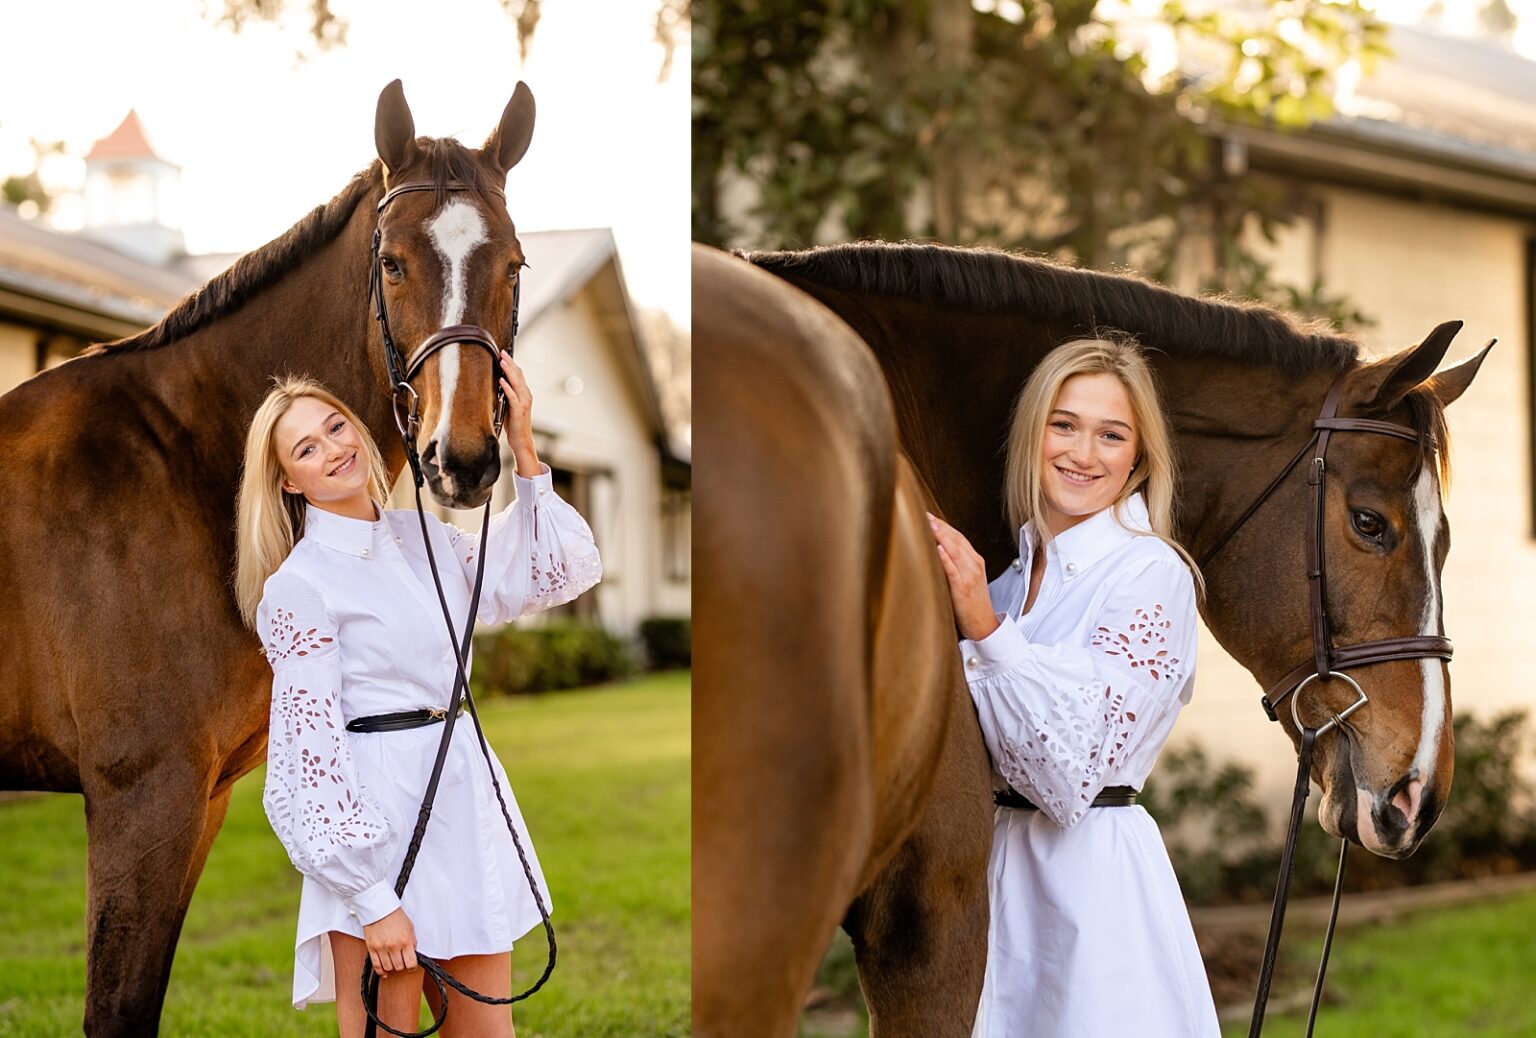 Equestrian inspired senior outfit for senior pictures. White dress with equestrian belt and tall boots. Ocala, FL. Hunter/jumper rider. Golden Oaks Farm LLC. Posing with horses. Sunset.